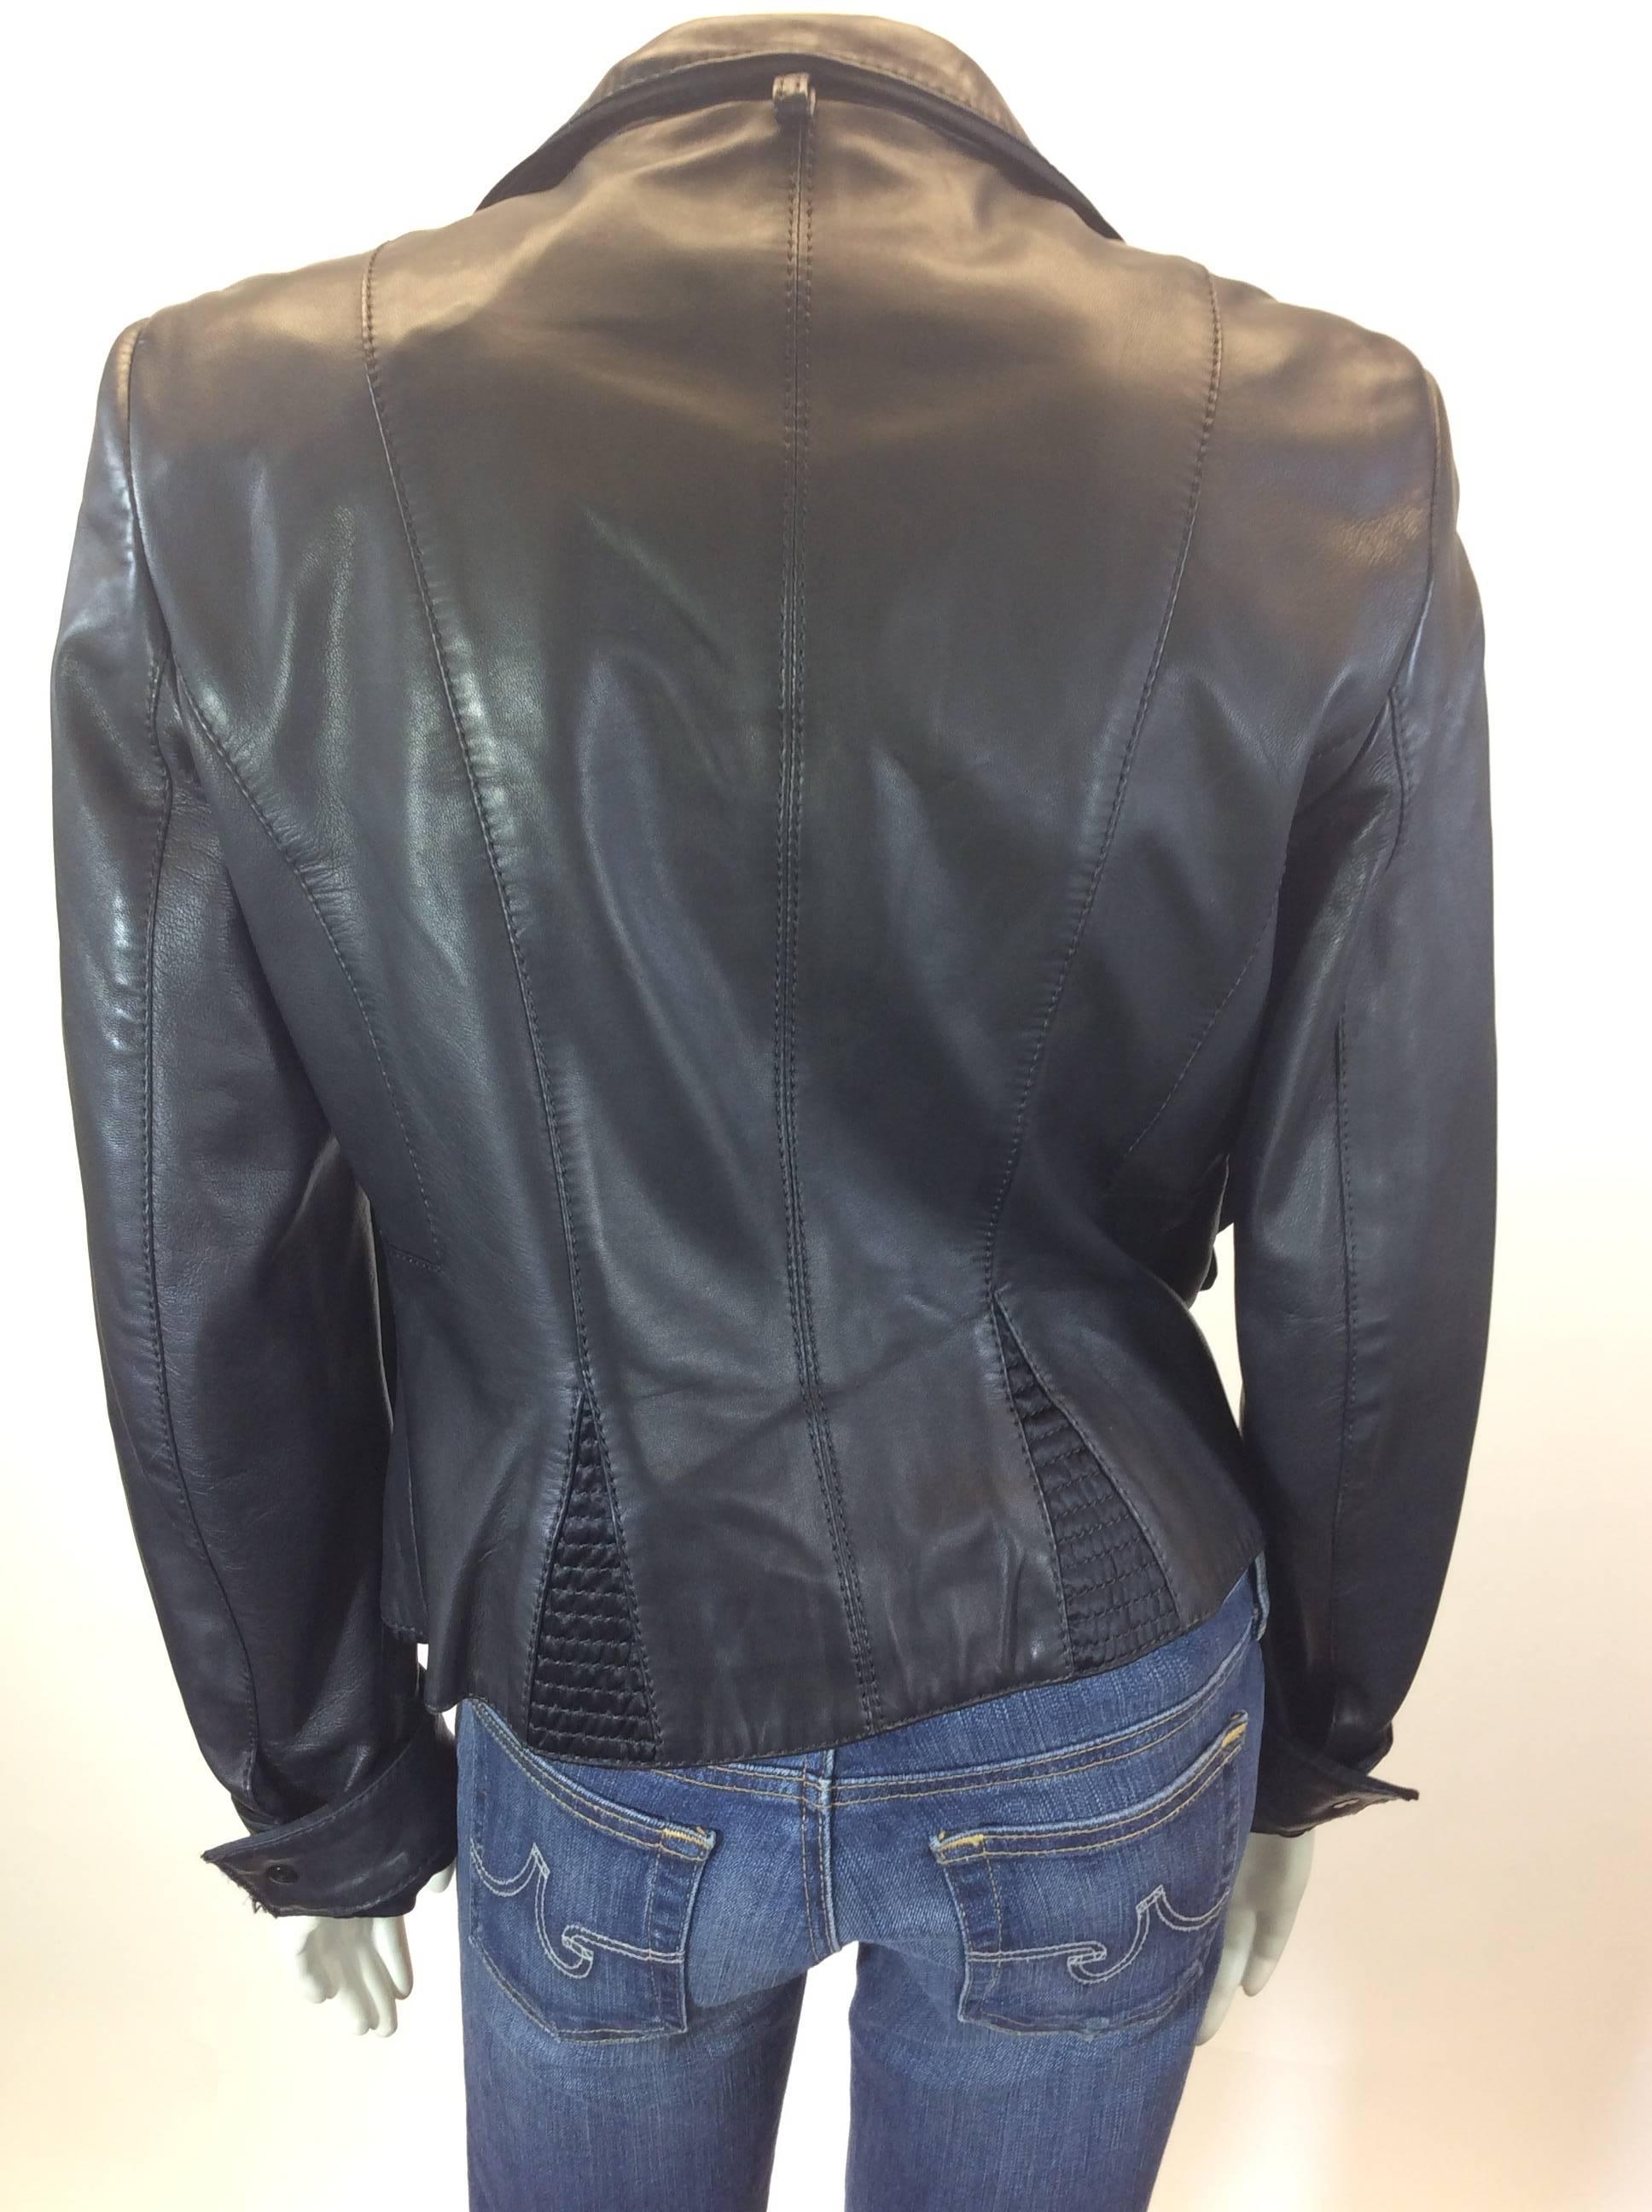 Roberto Cavalli Black Leather Motorcycle Jacket w/ Belt  In Excellent Condition For Sale In Narberth, PA